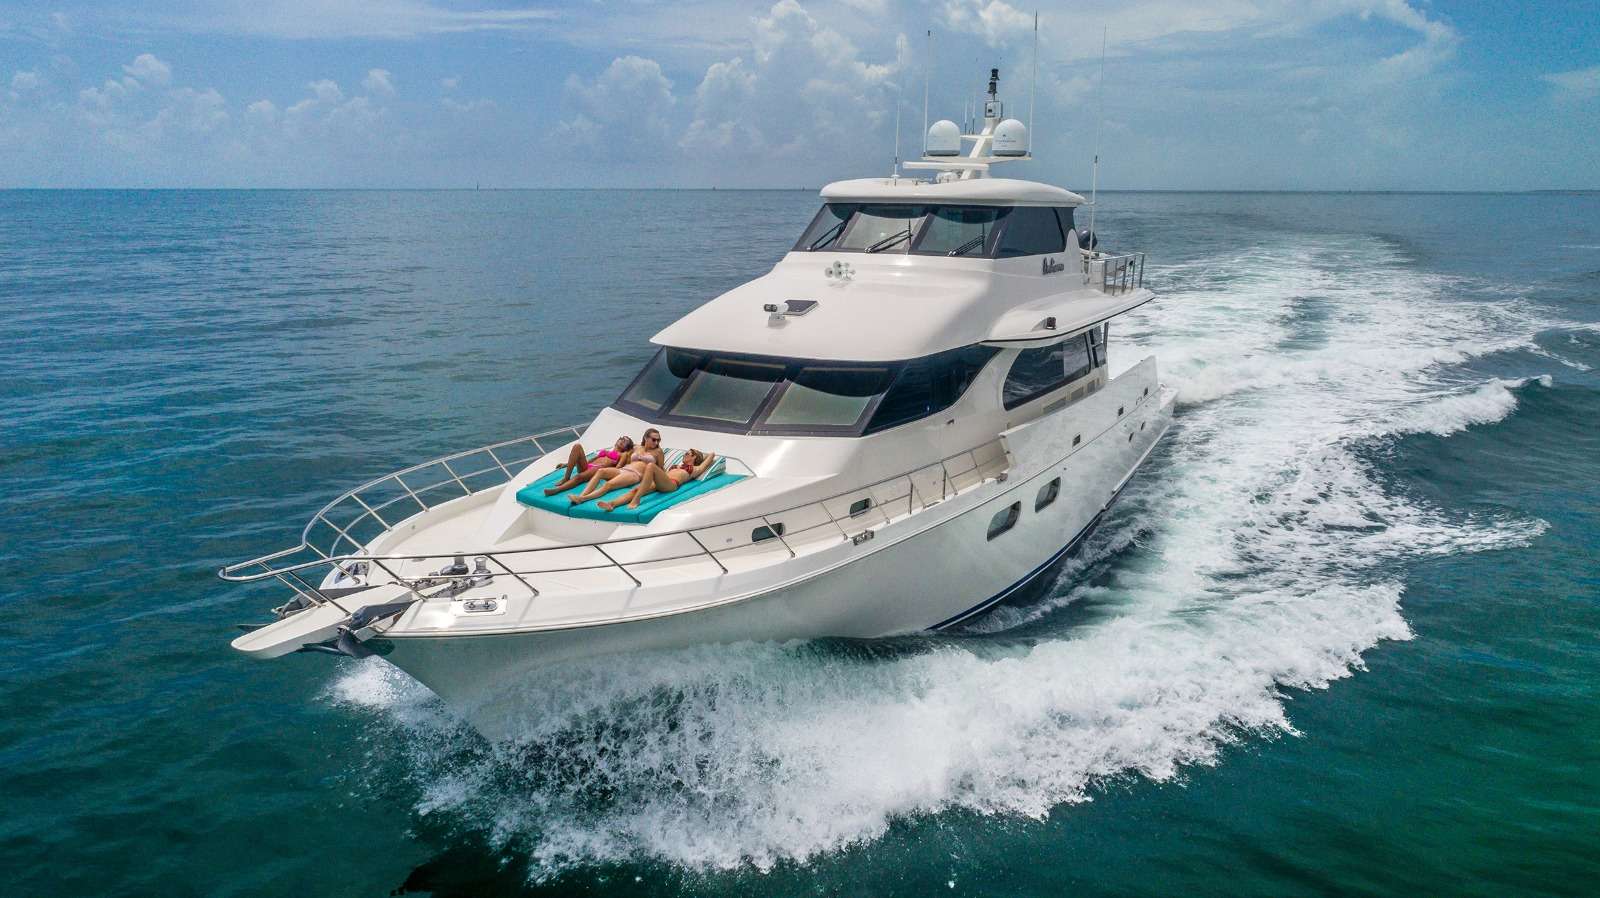 ANDIAMO - Yacht Charter Fort Lauderdale & Boat hire in Florida & Bahamas 1